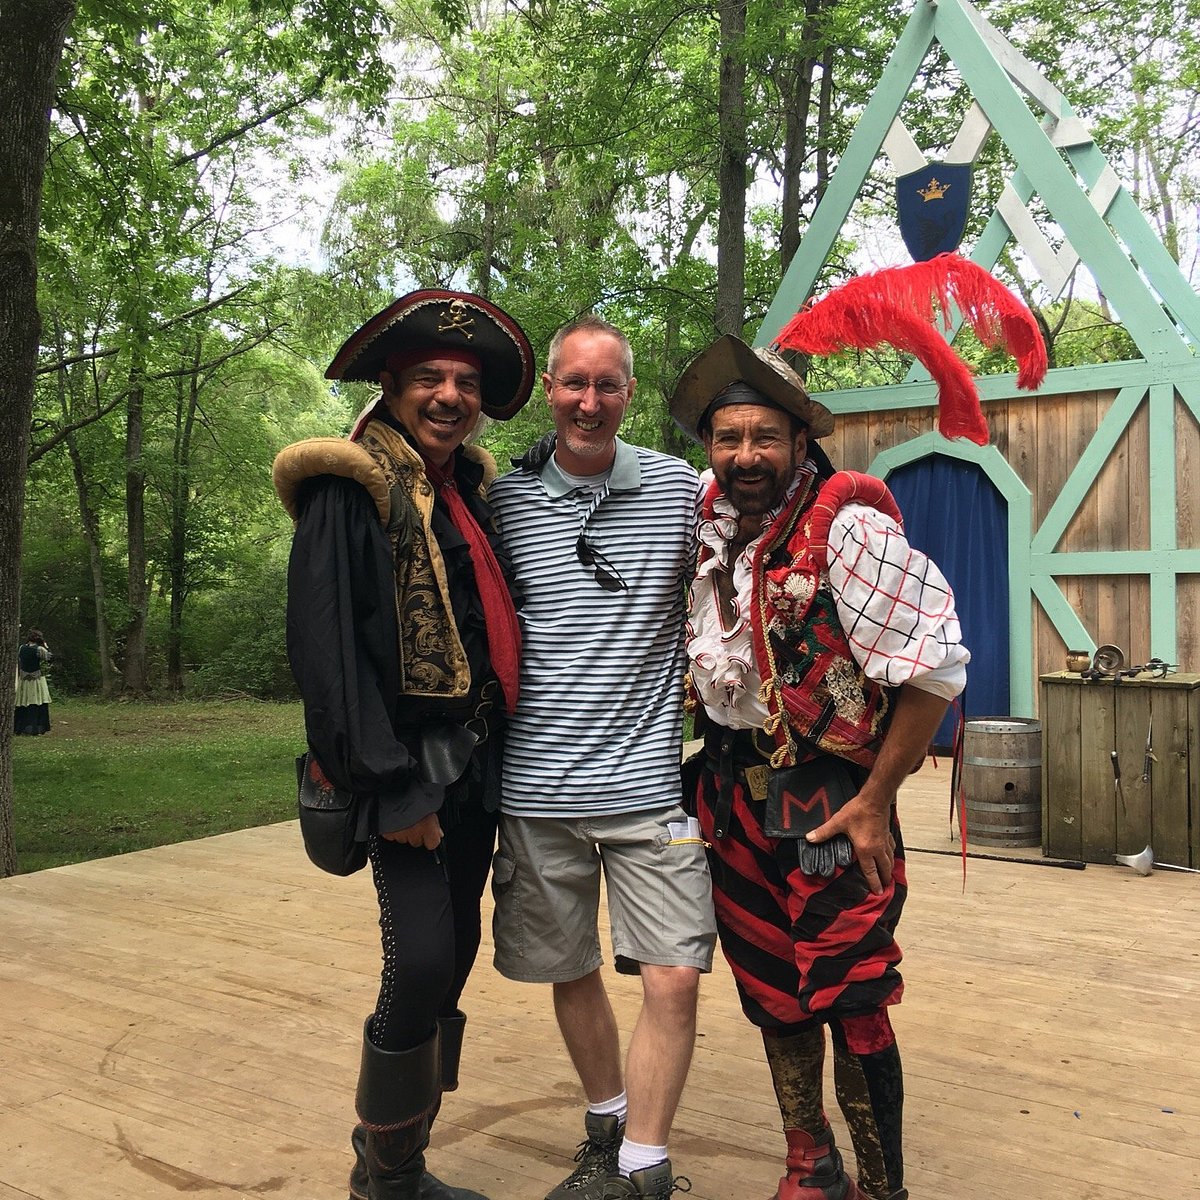 STERLING RENAISSANCE FESTIVAL All You Need to Know BEFORE You Go